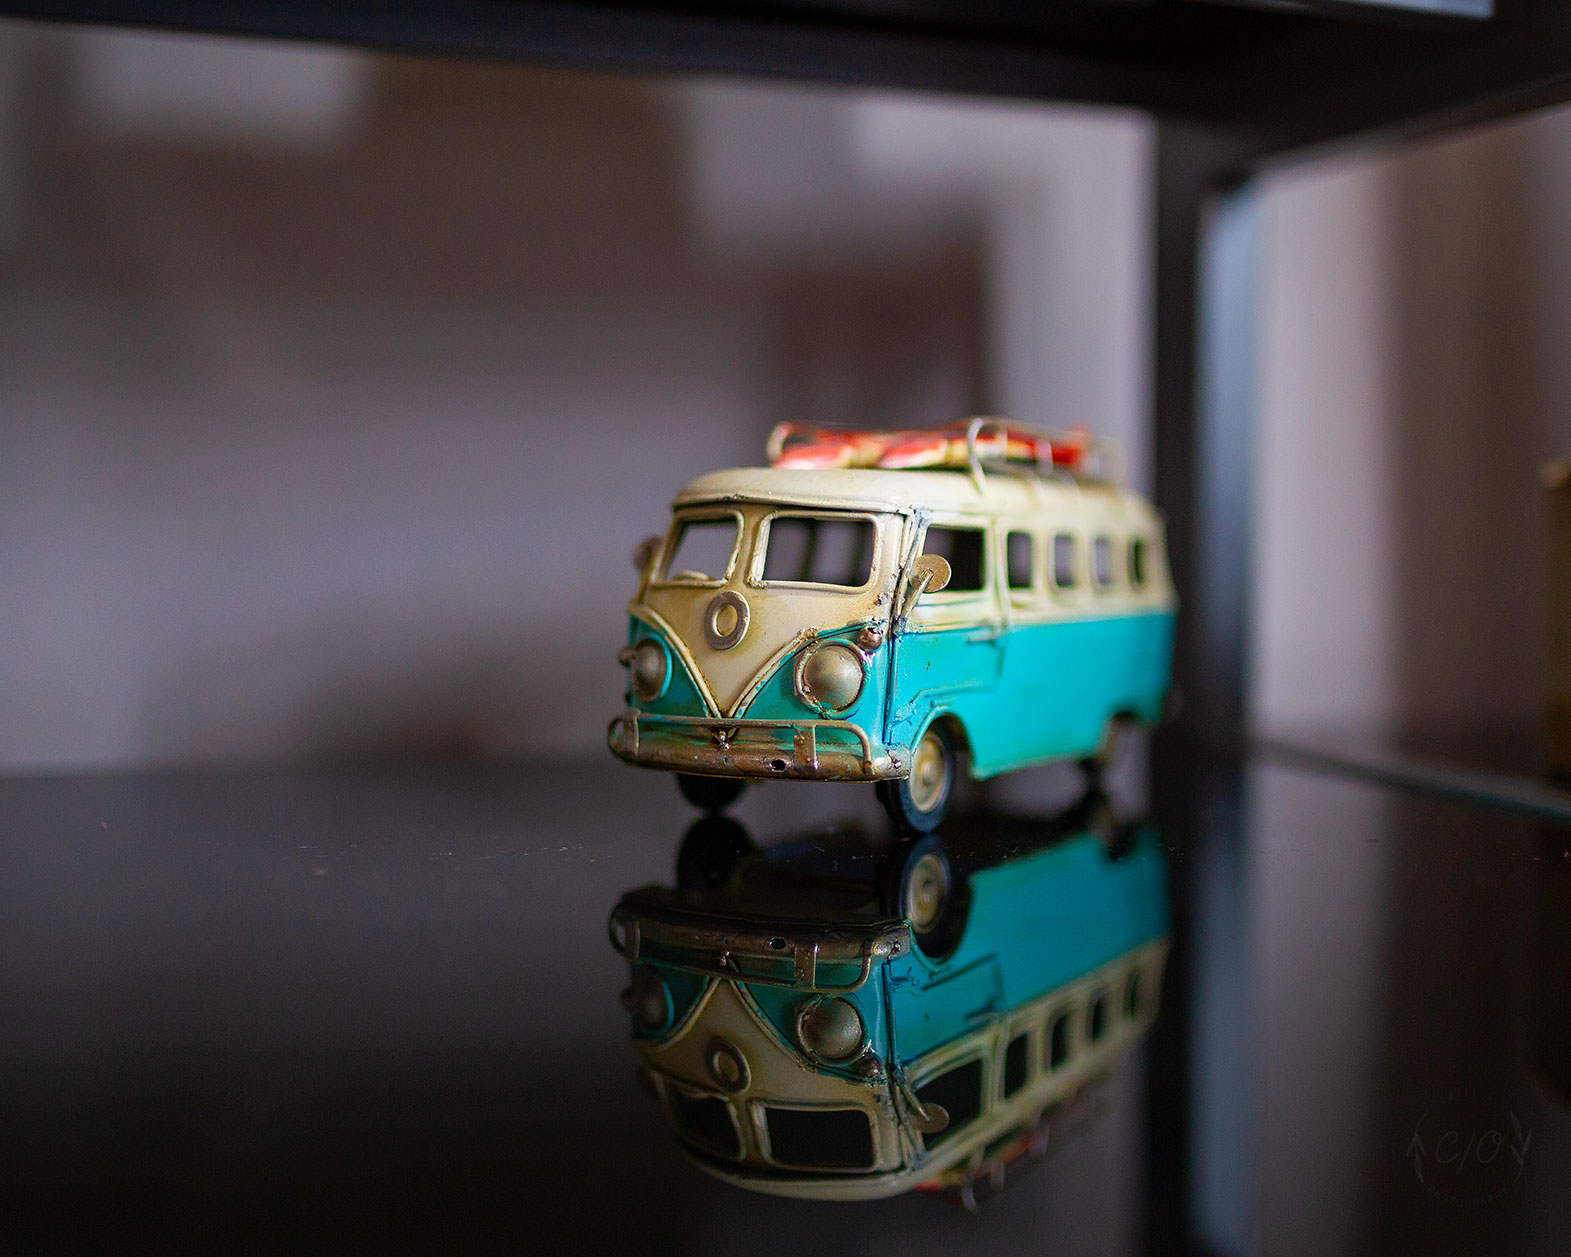 A Photograph of a Toy Kombi on a reflective surface